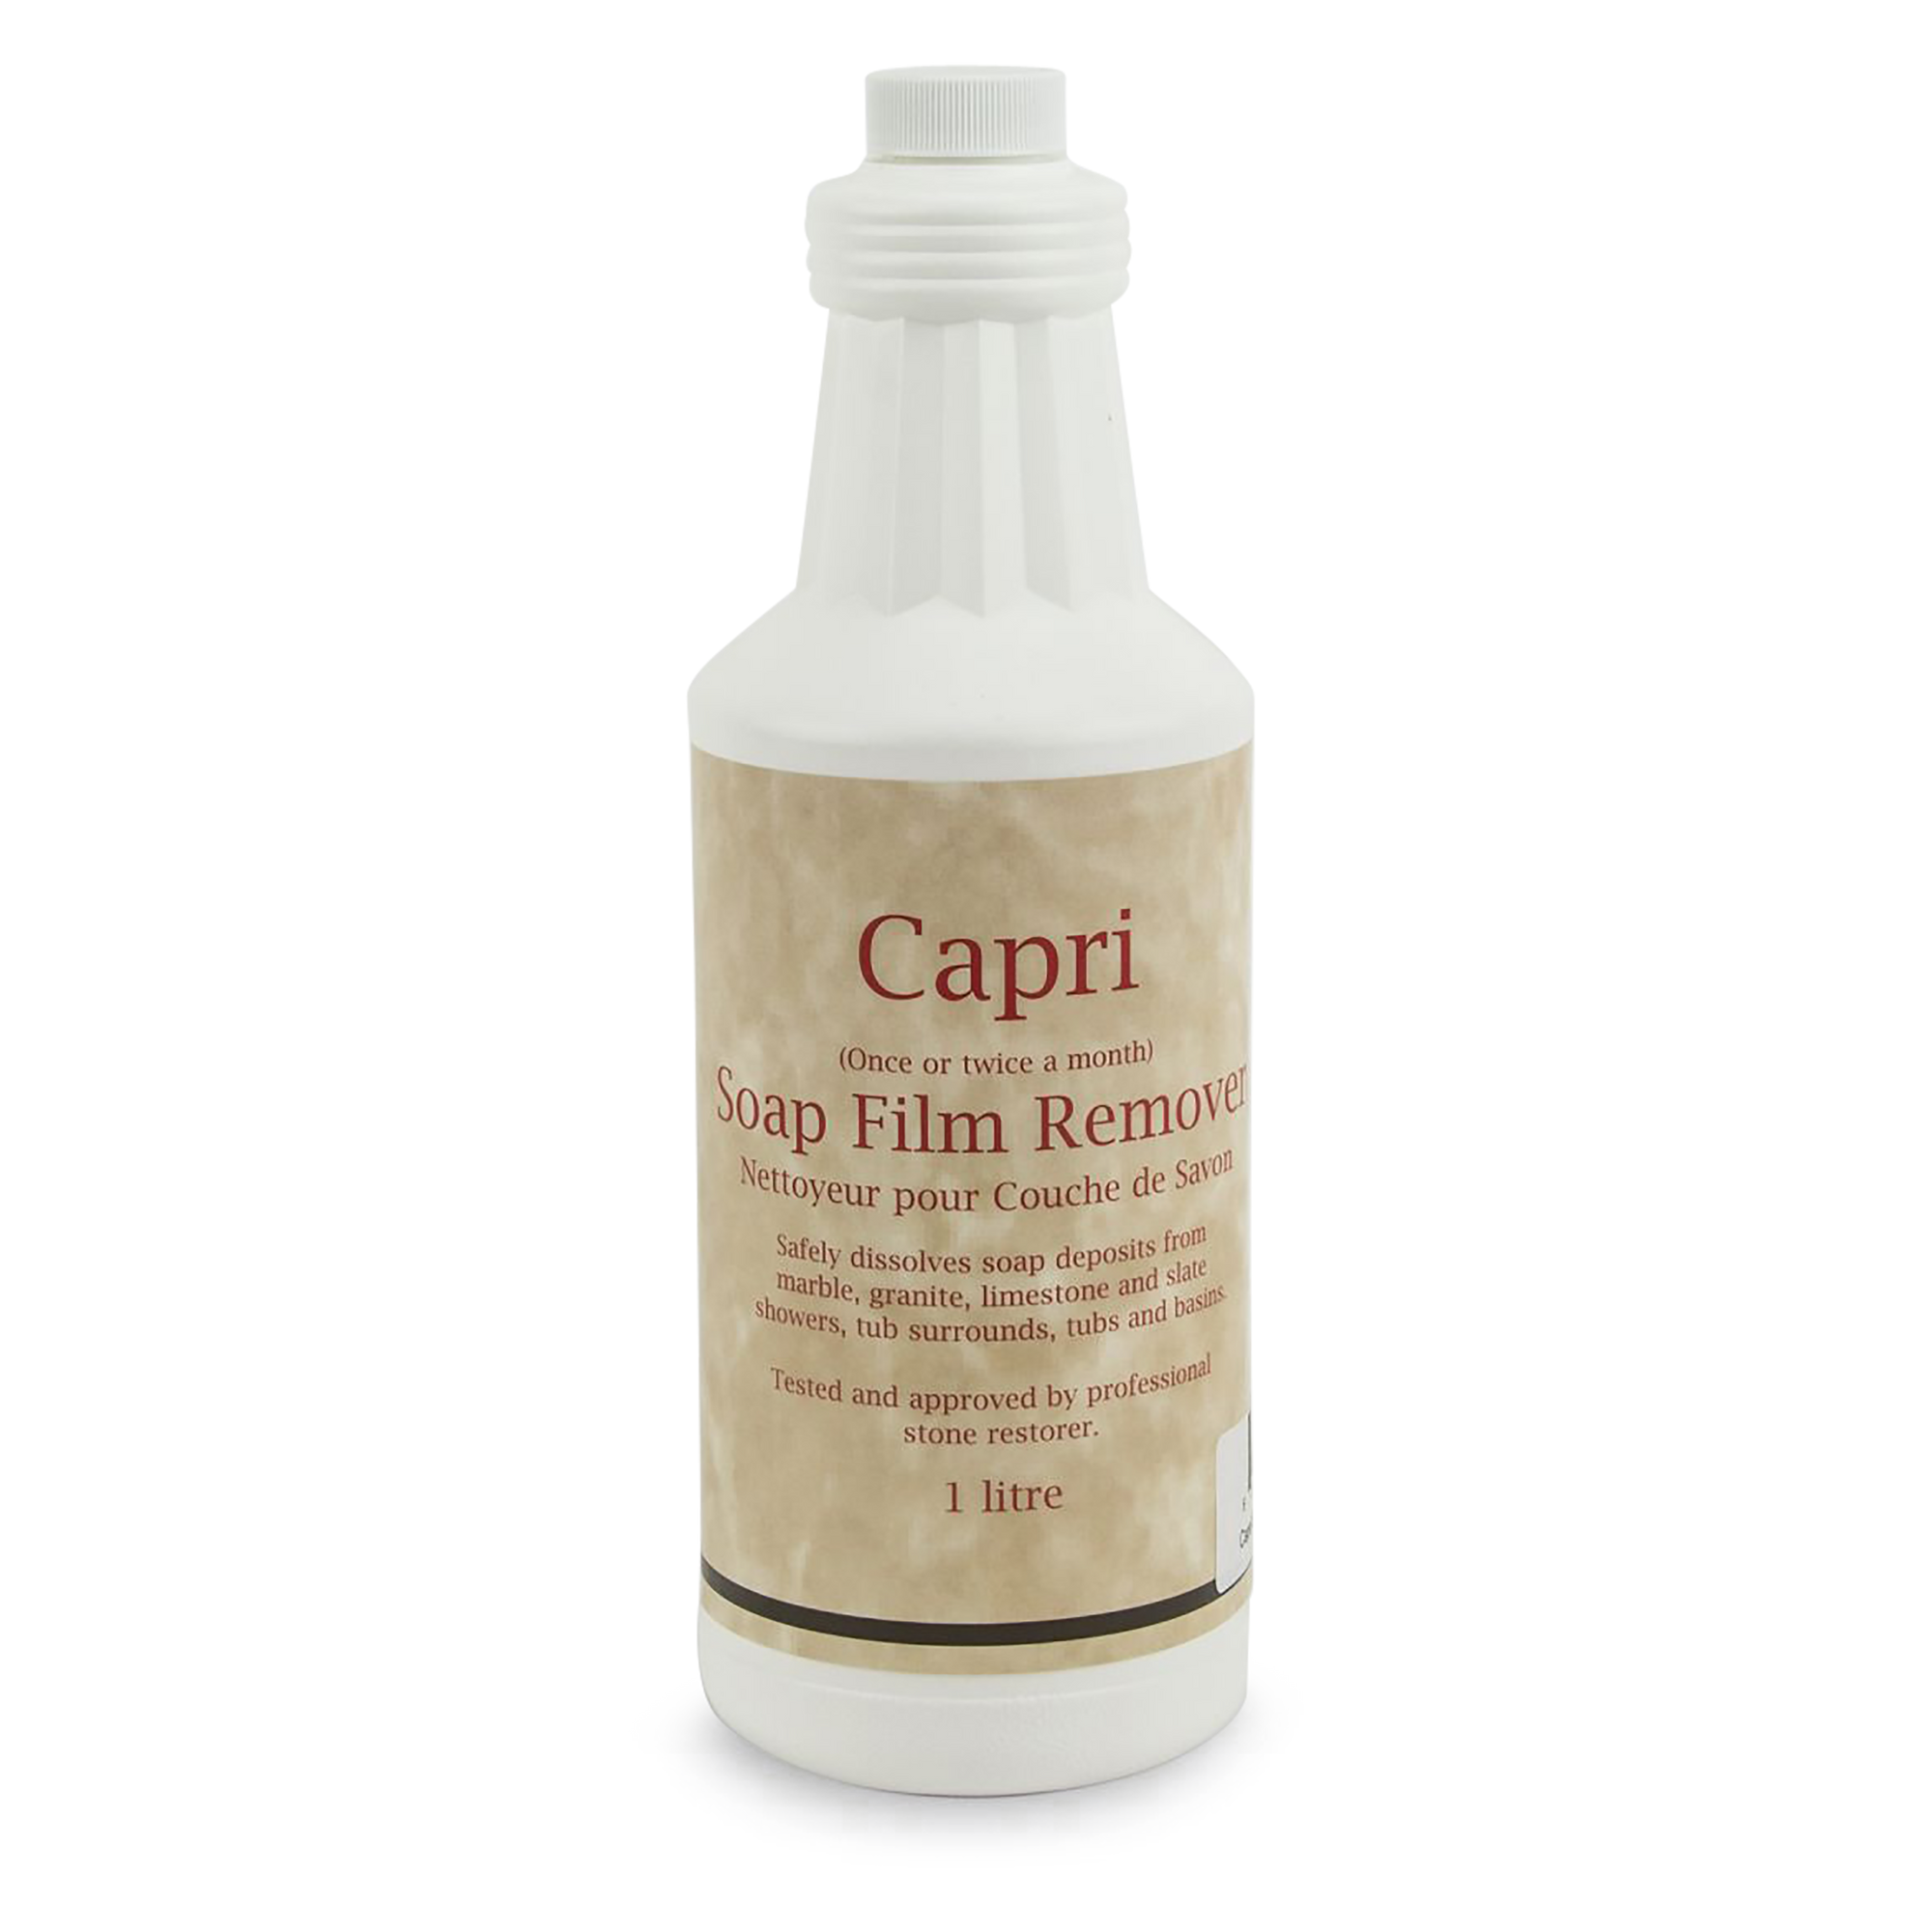 Capri Soap Film Remover safely removes soap deposits from marble, granite, limestone and slate showers, tub surrounds, tubs and basins.